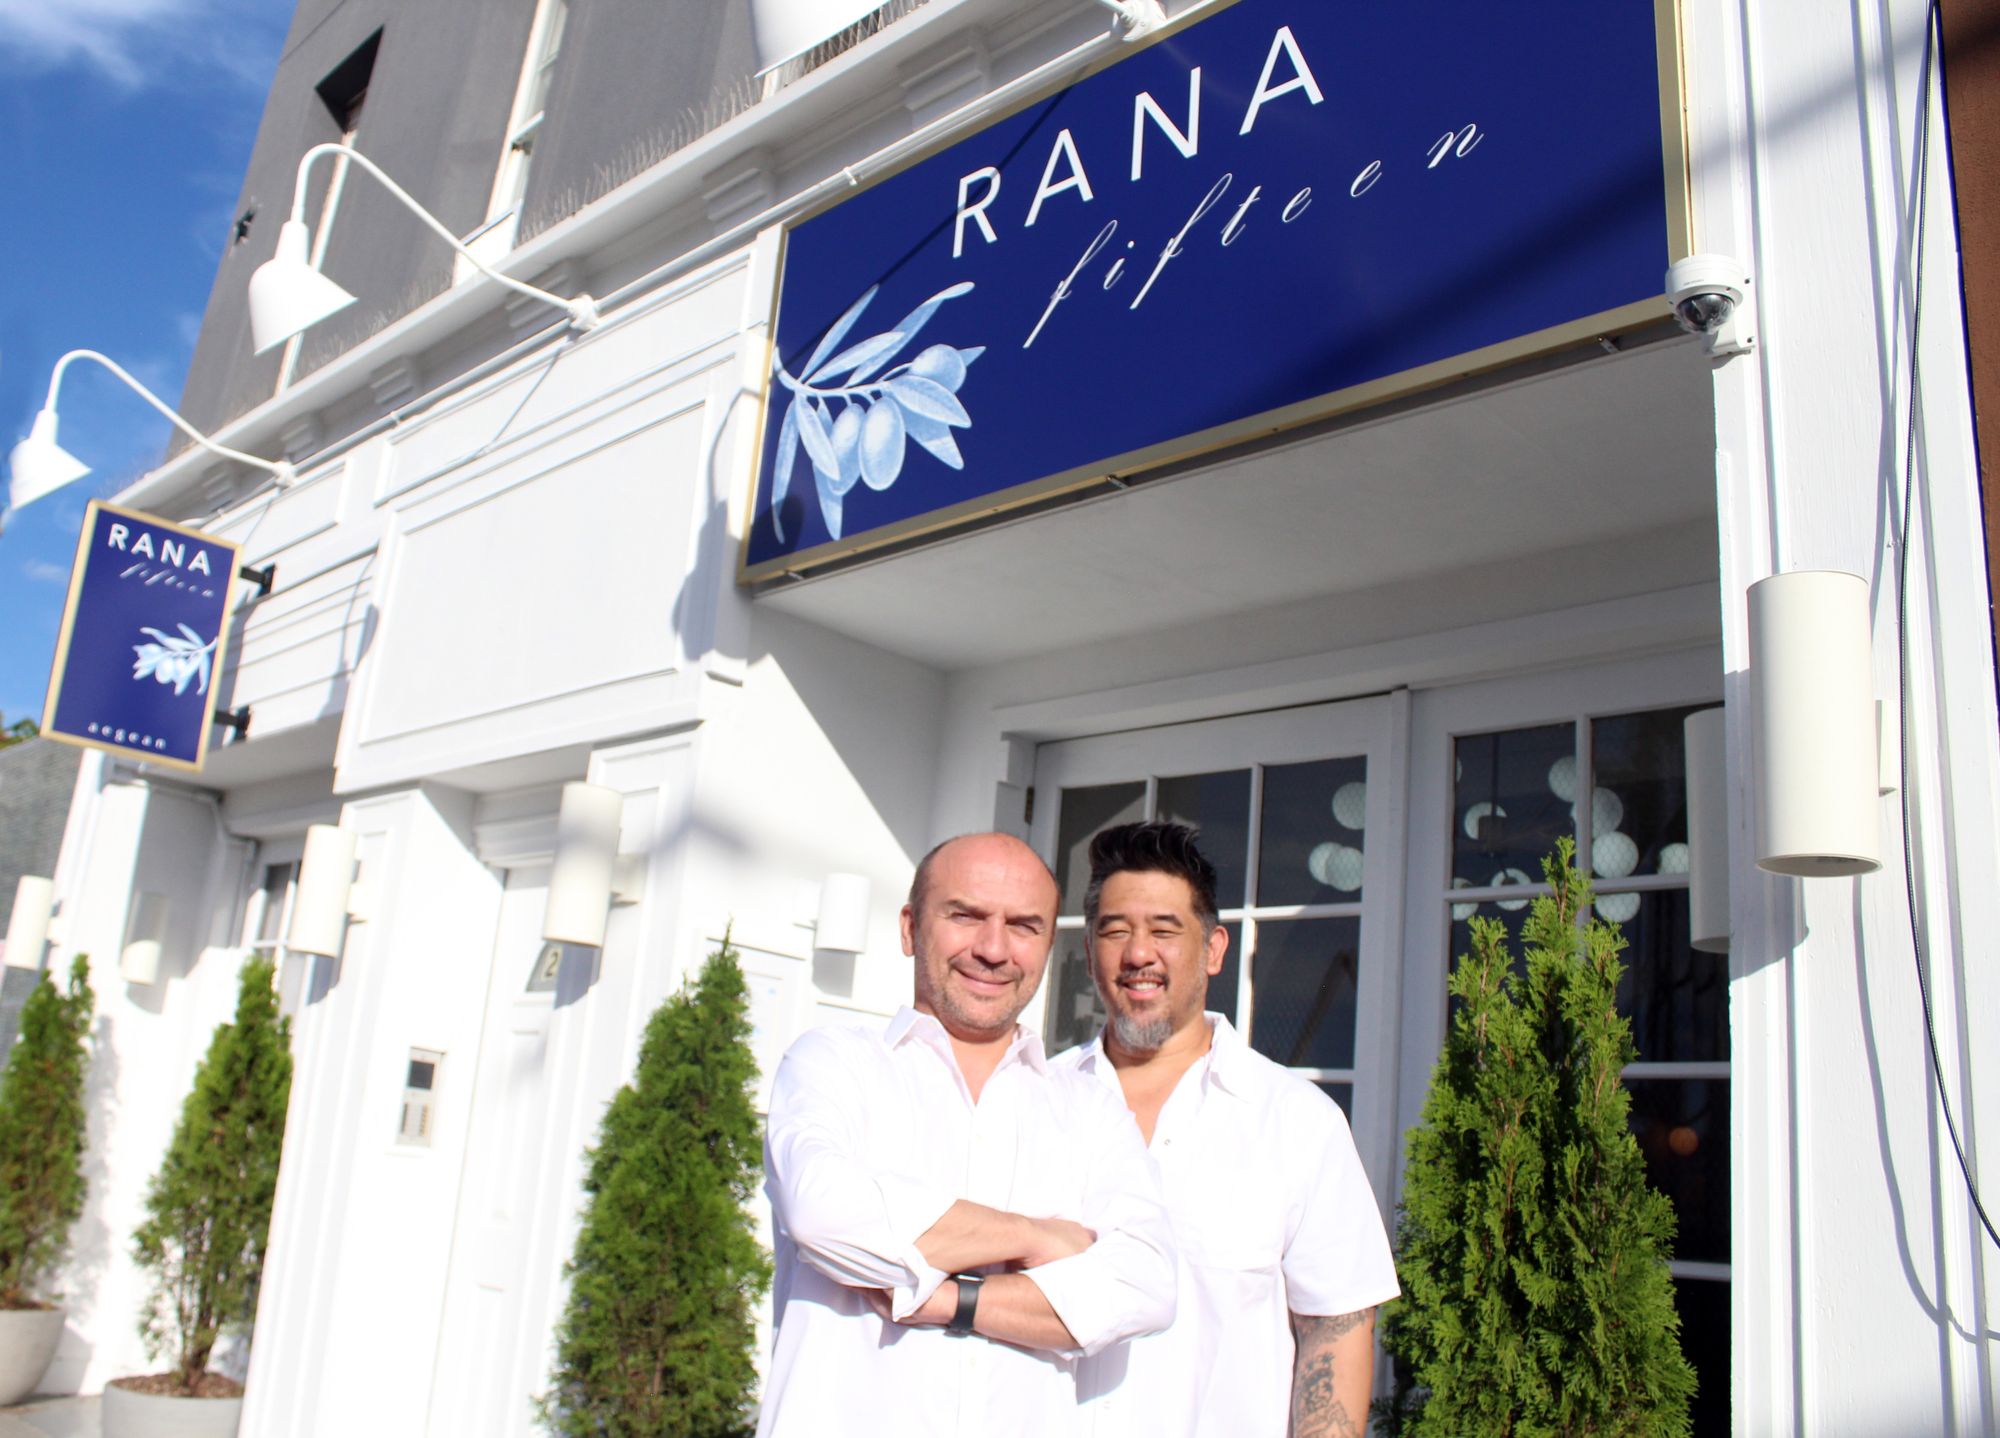 Feast Family Style at Rana Fifteen in Park Slope